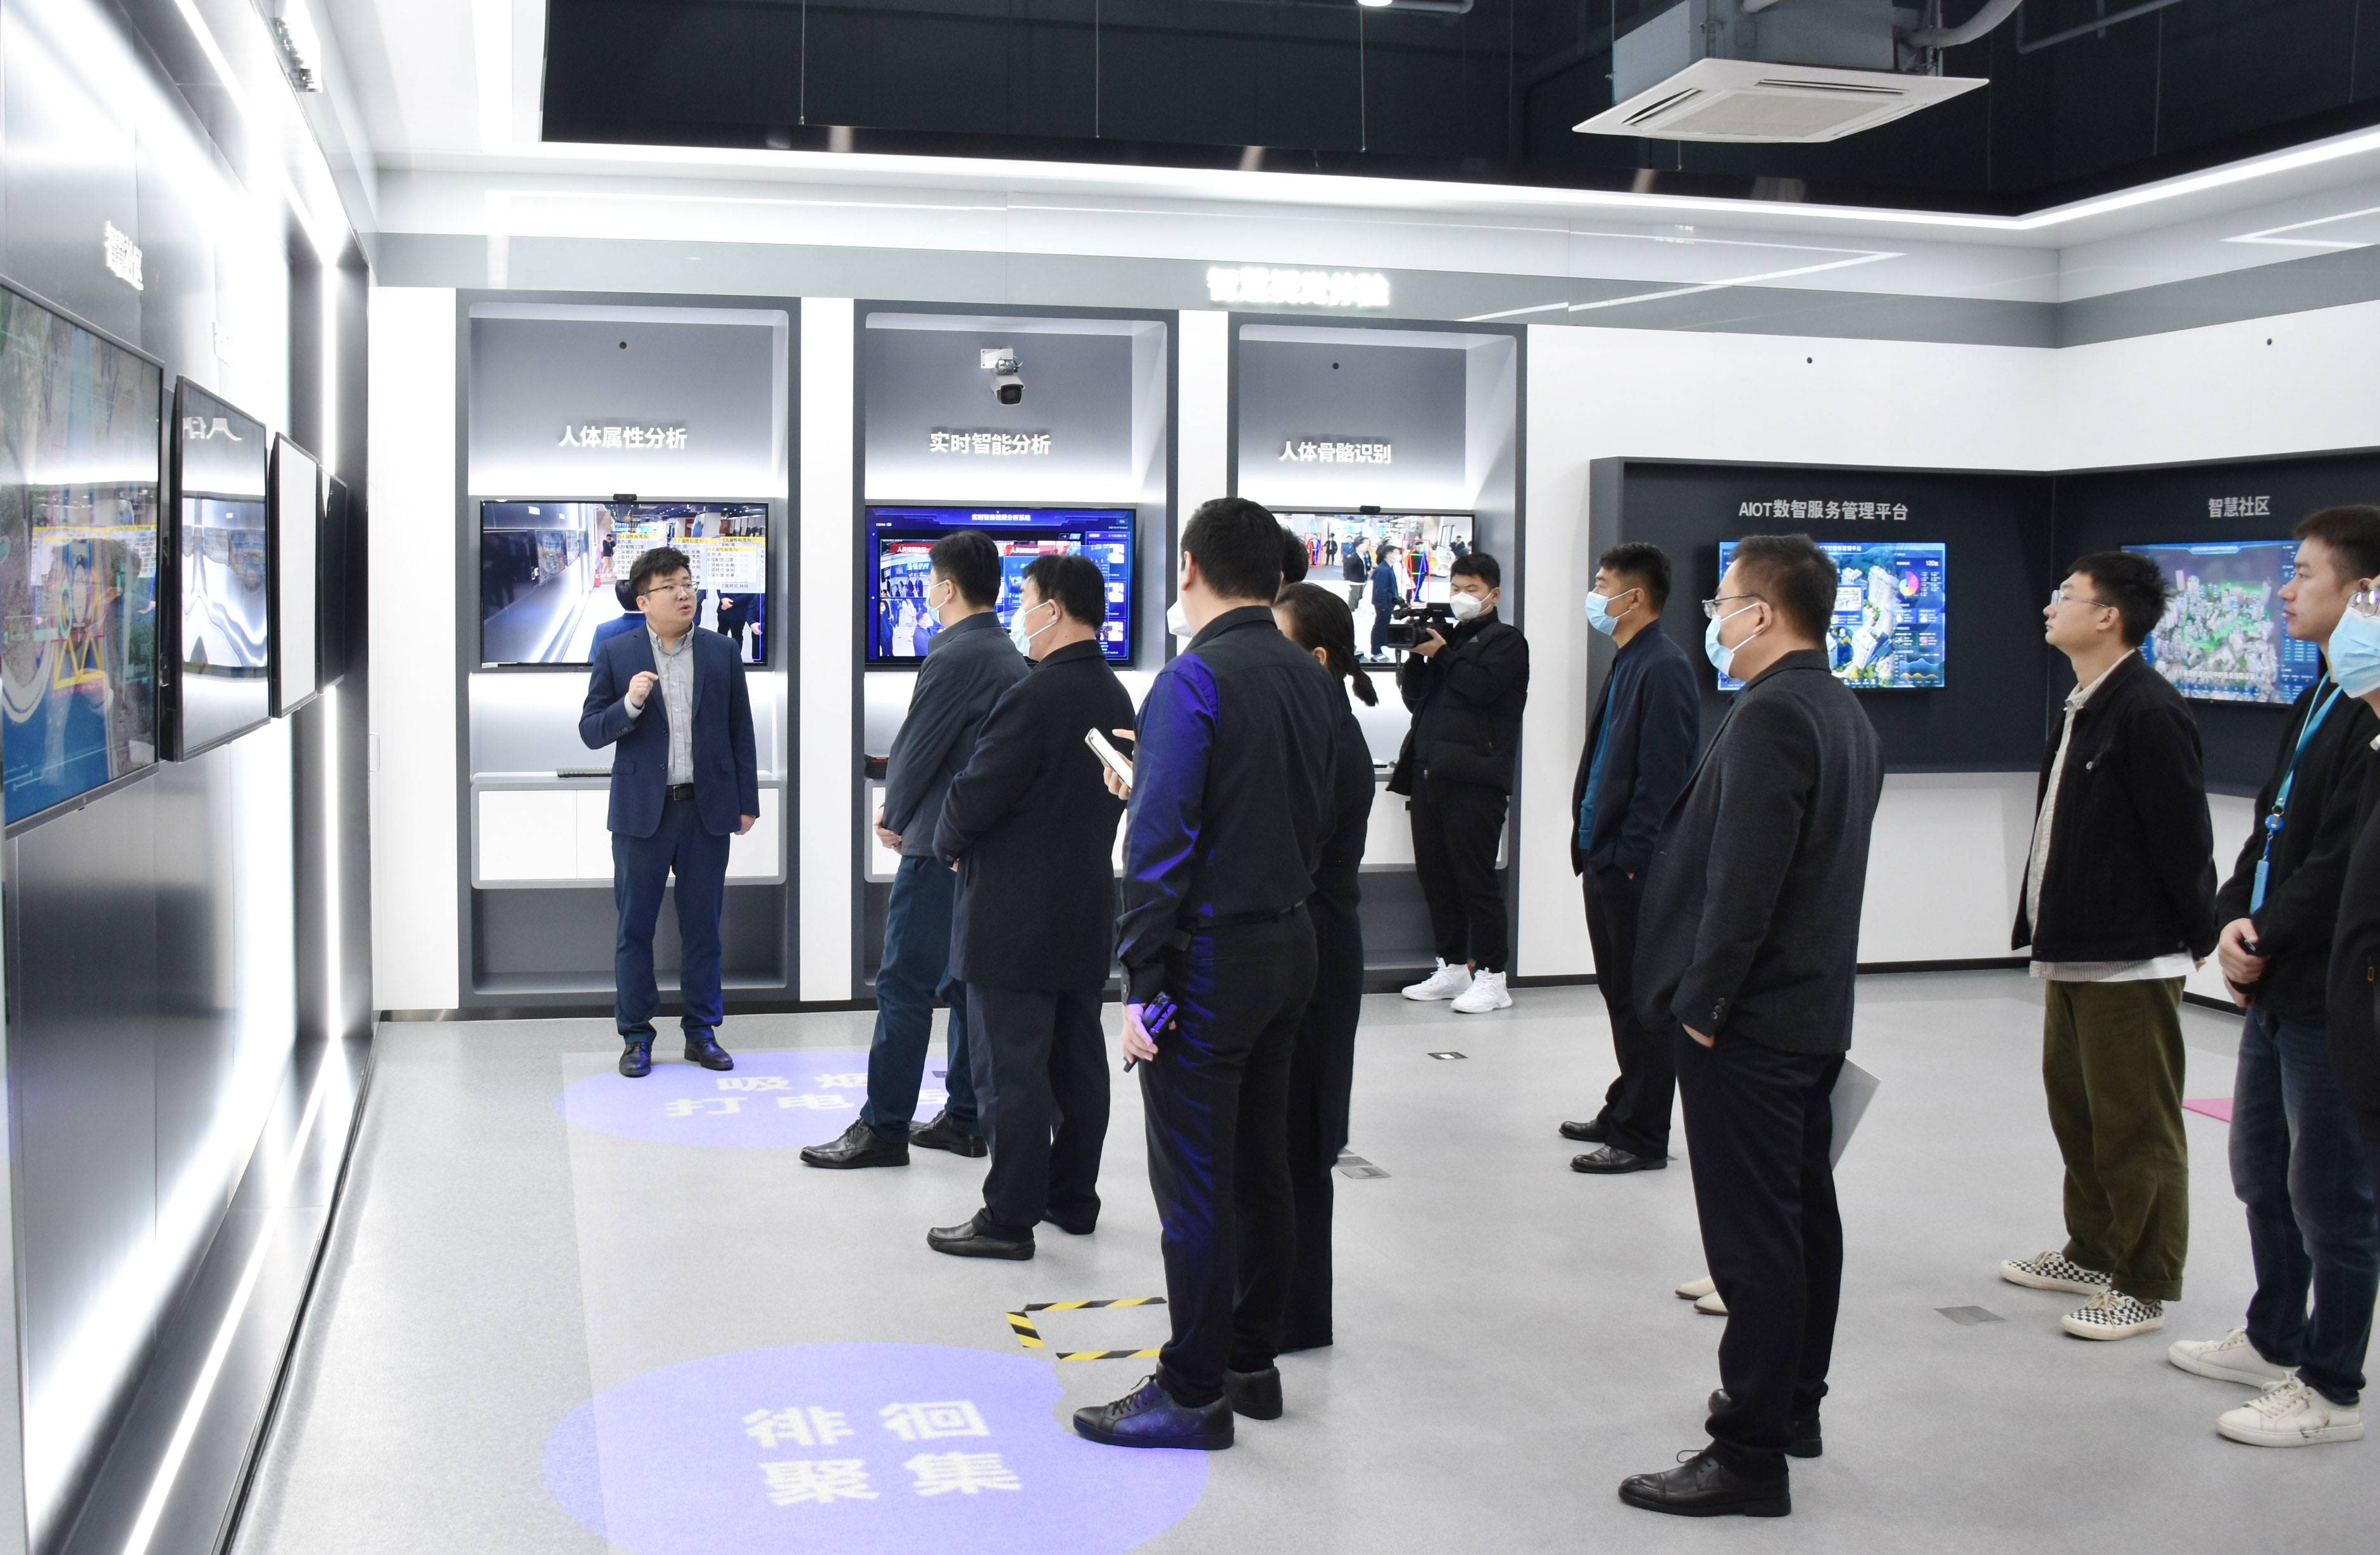 Liu Guocheng, Deputy Secretary of the Daiyue District Committee and District Mayor of Tai'an City, and his delegation conducted an investigation and research on Minivision Technology